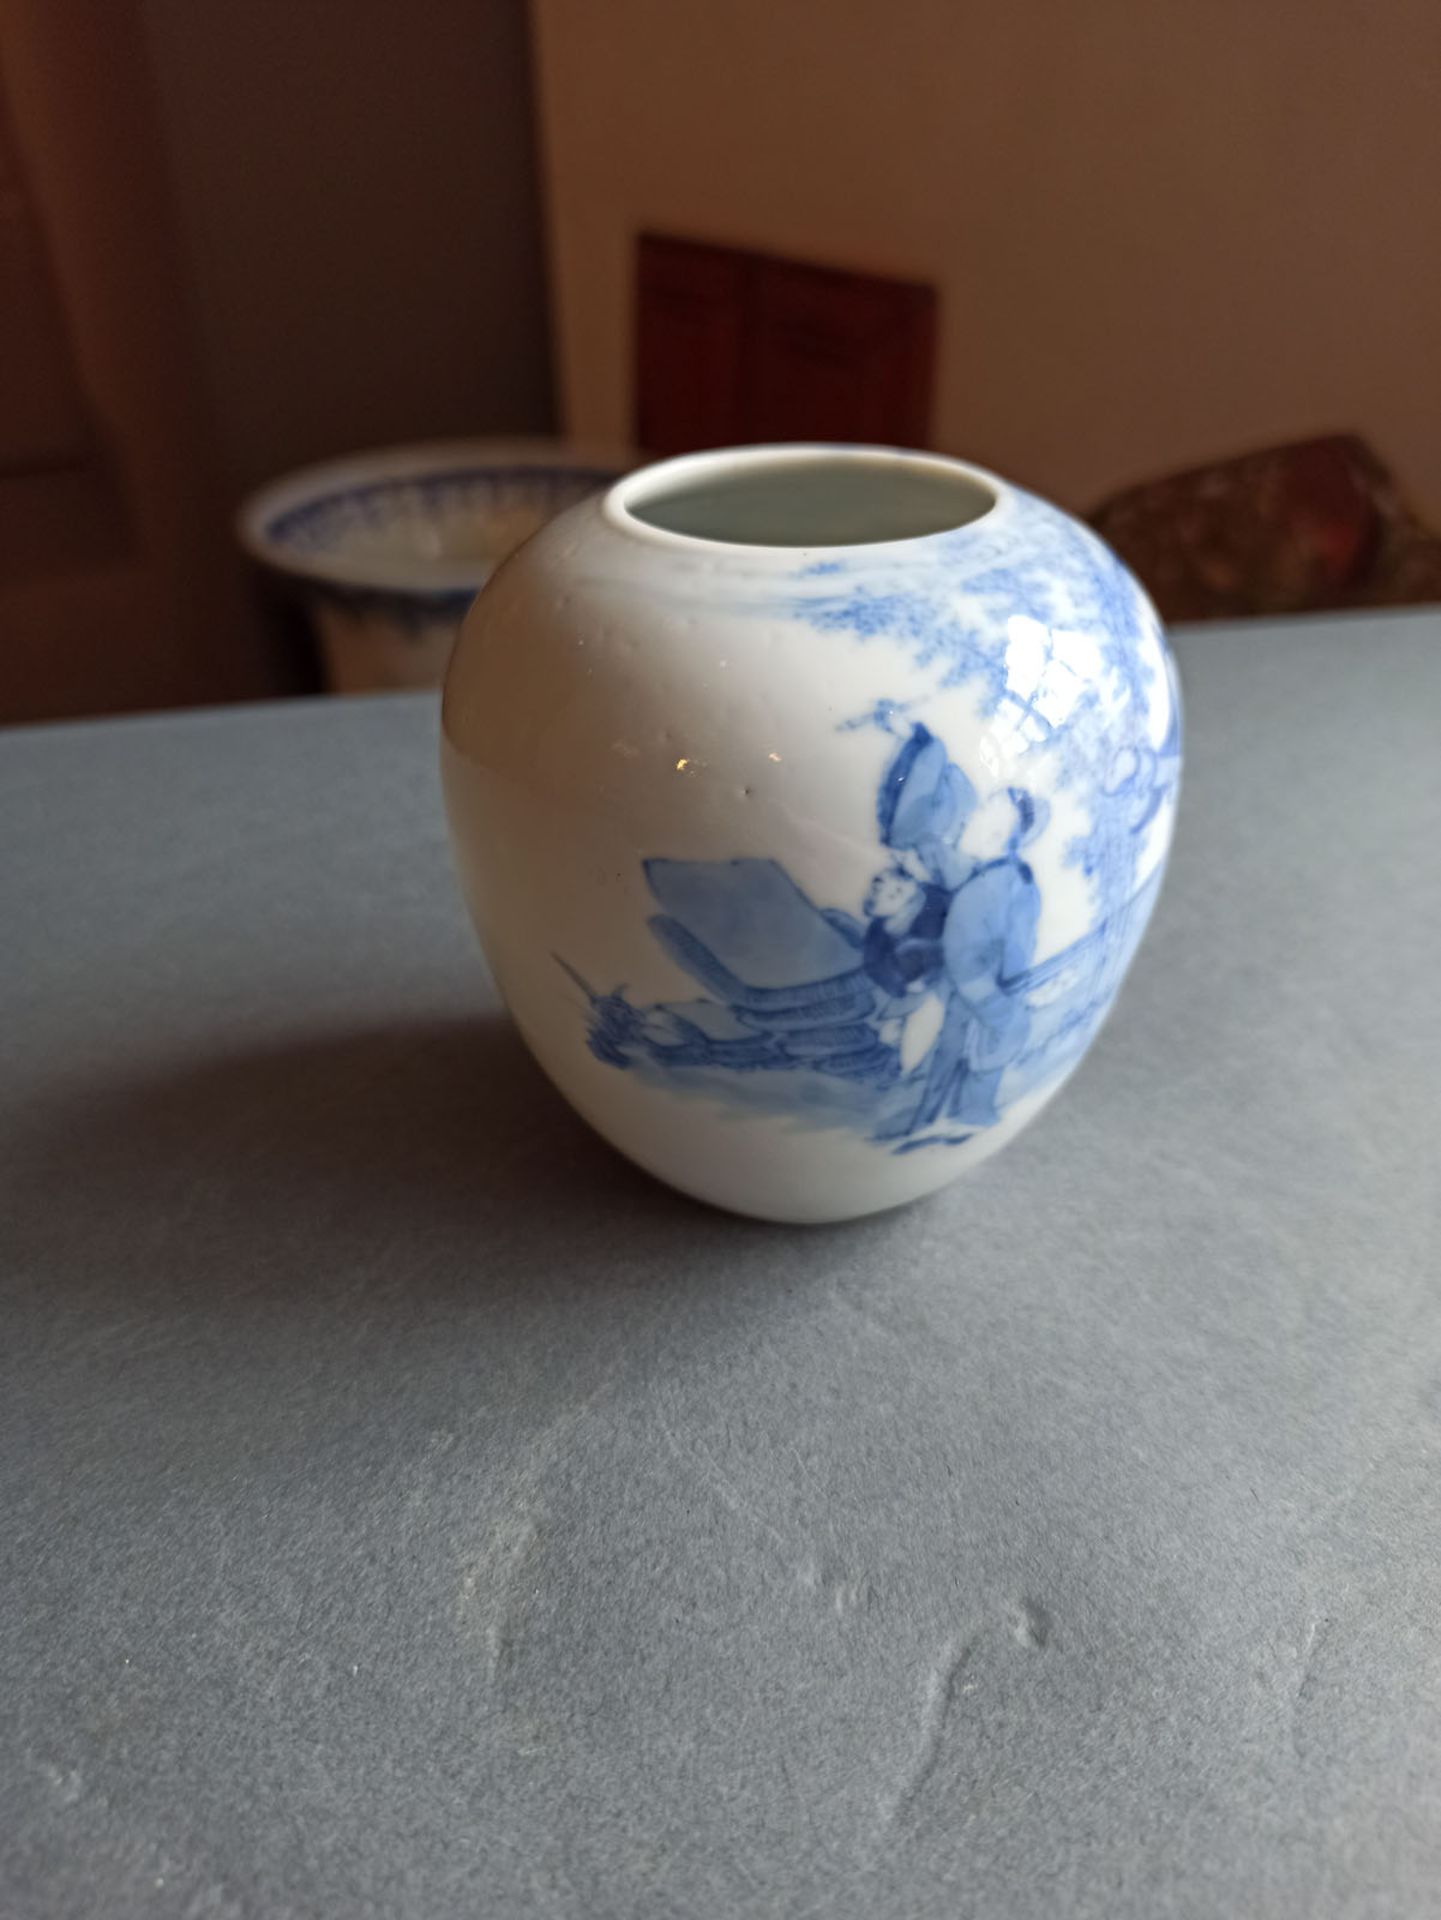 A GLOBULAR BLUE AND WHITE PORCELAIN WITH SCHIOLARS LOOKING AT A CALLIGRAPHY - Image 4 of 7